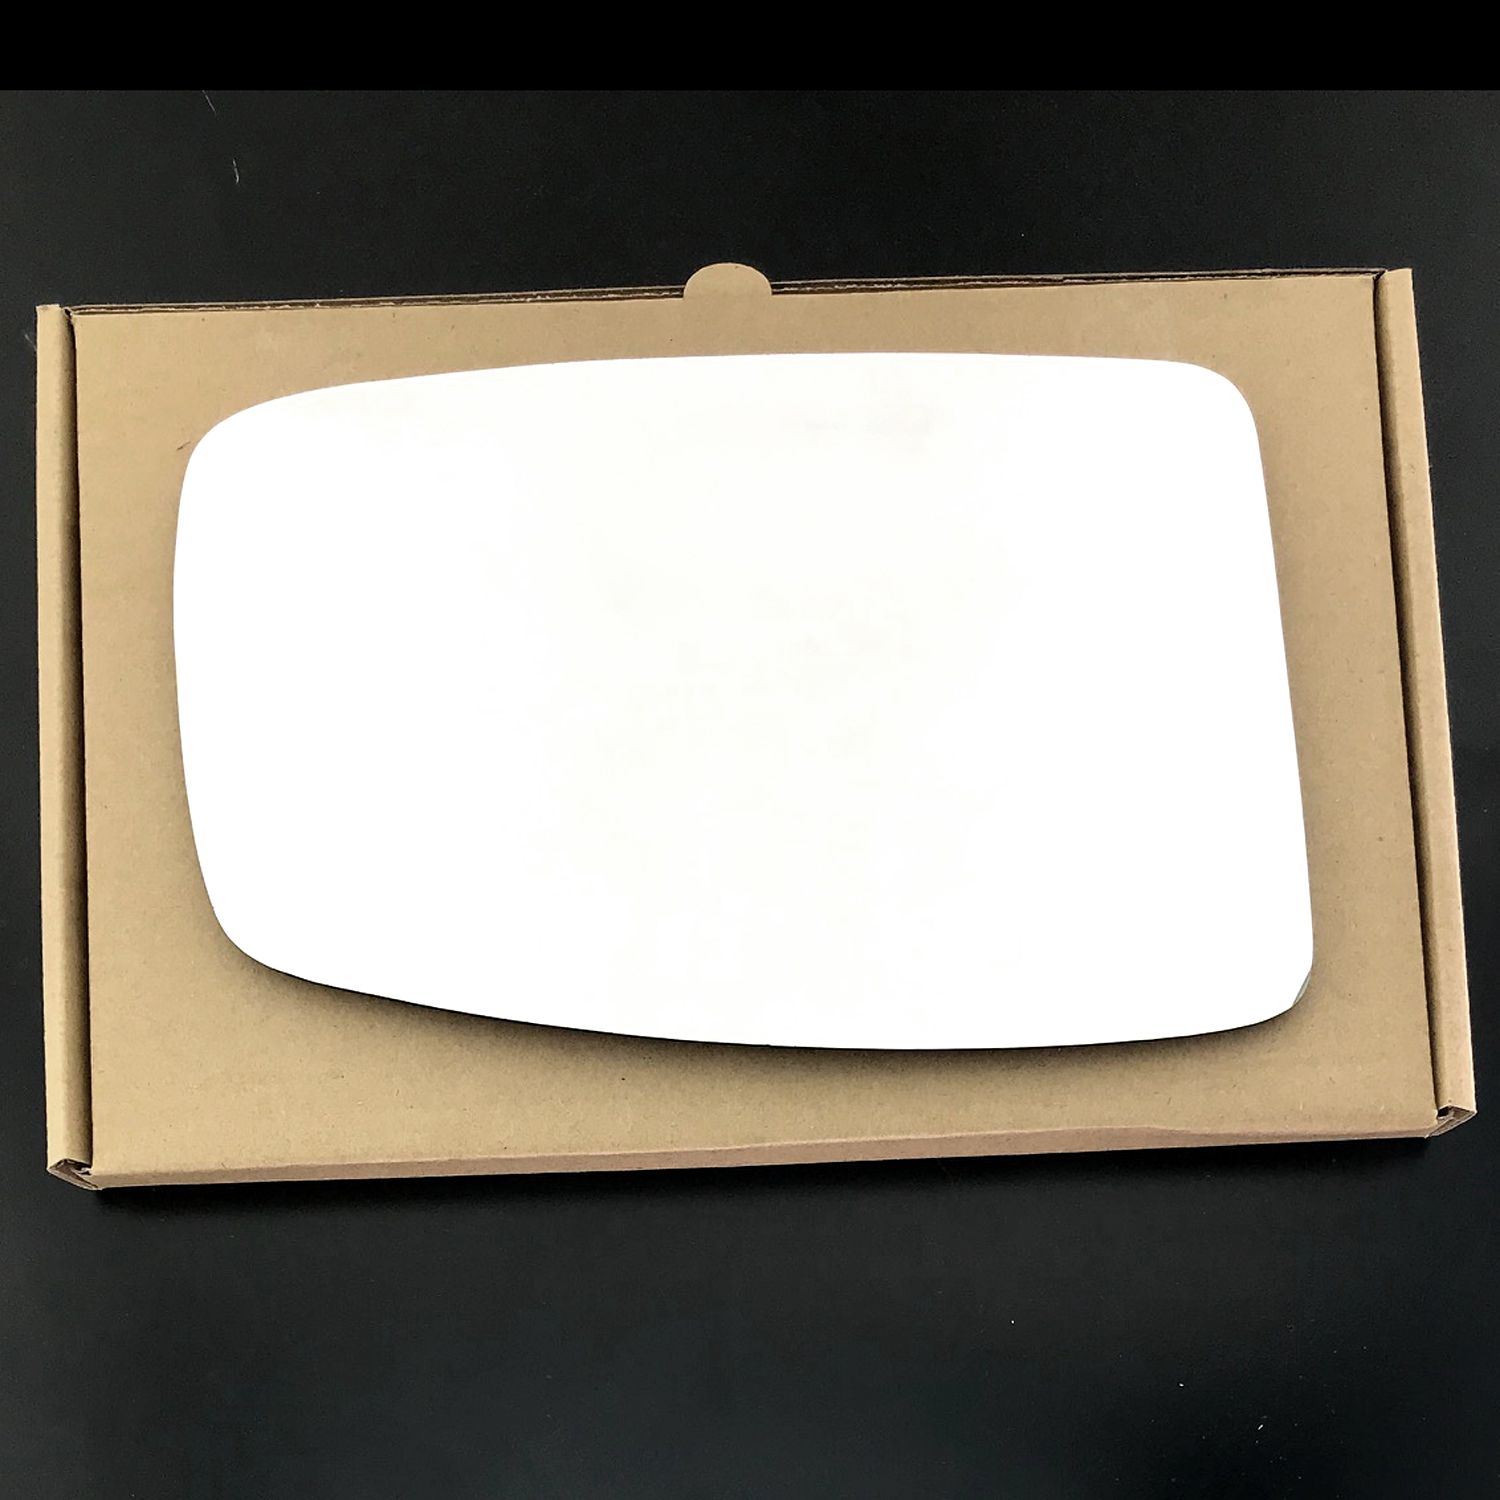 Nissan NV400 Wing Mirror Glass LEFT HAND ( UK Passenger Side ) 2011 to 2019 – Convex Wing Mirror